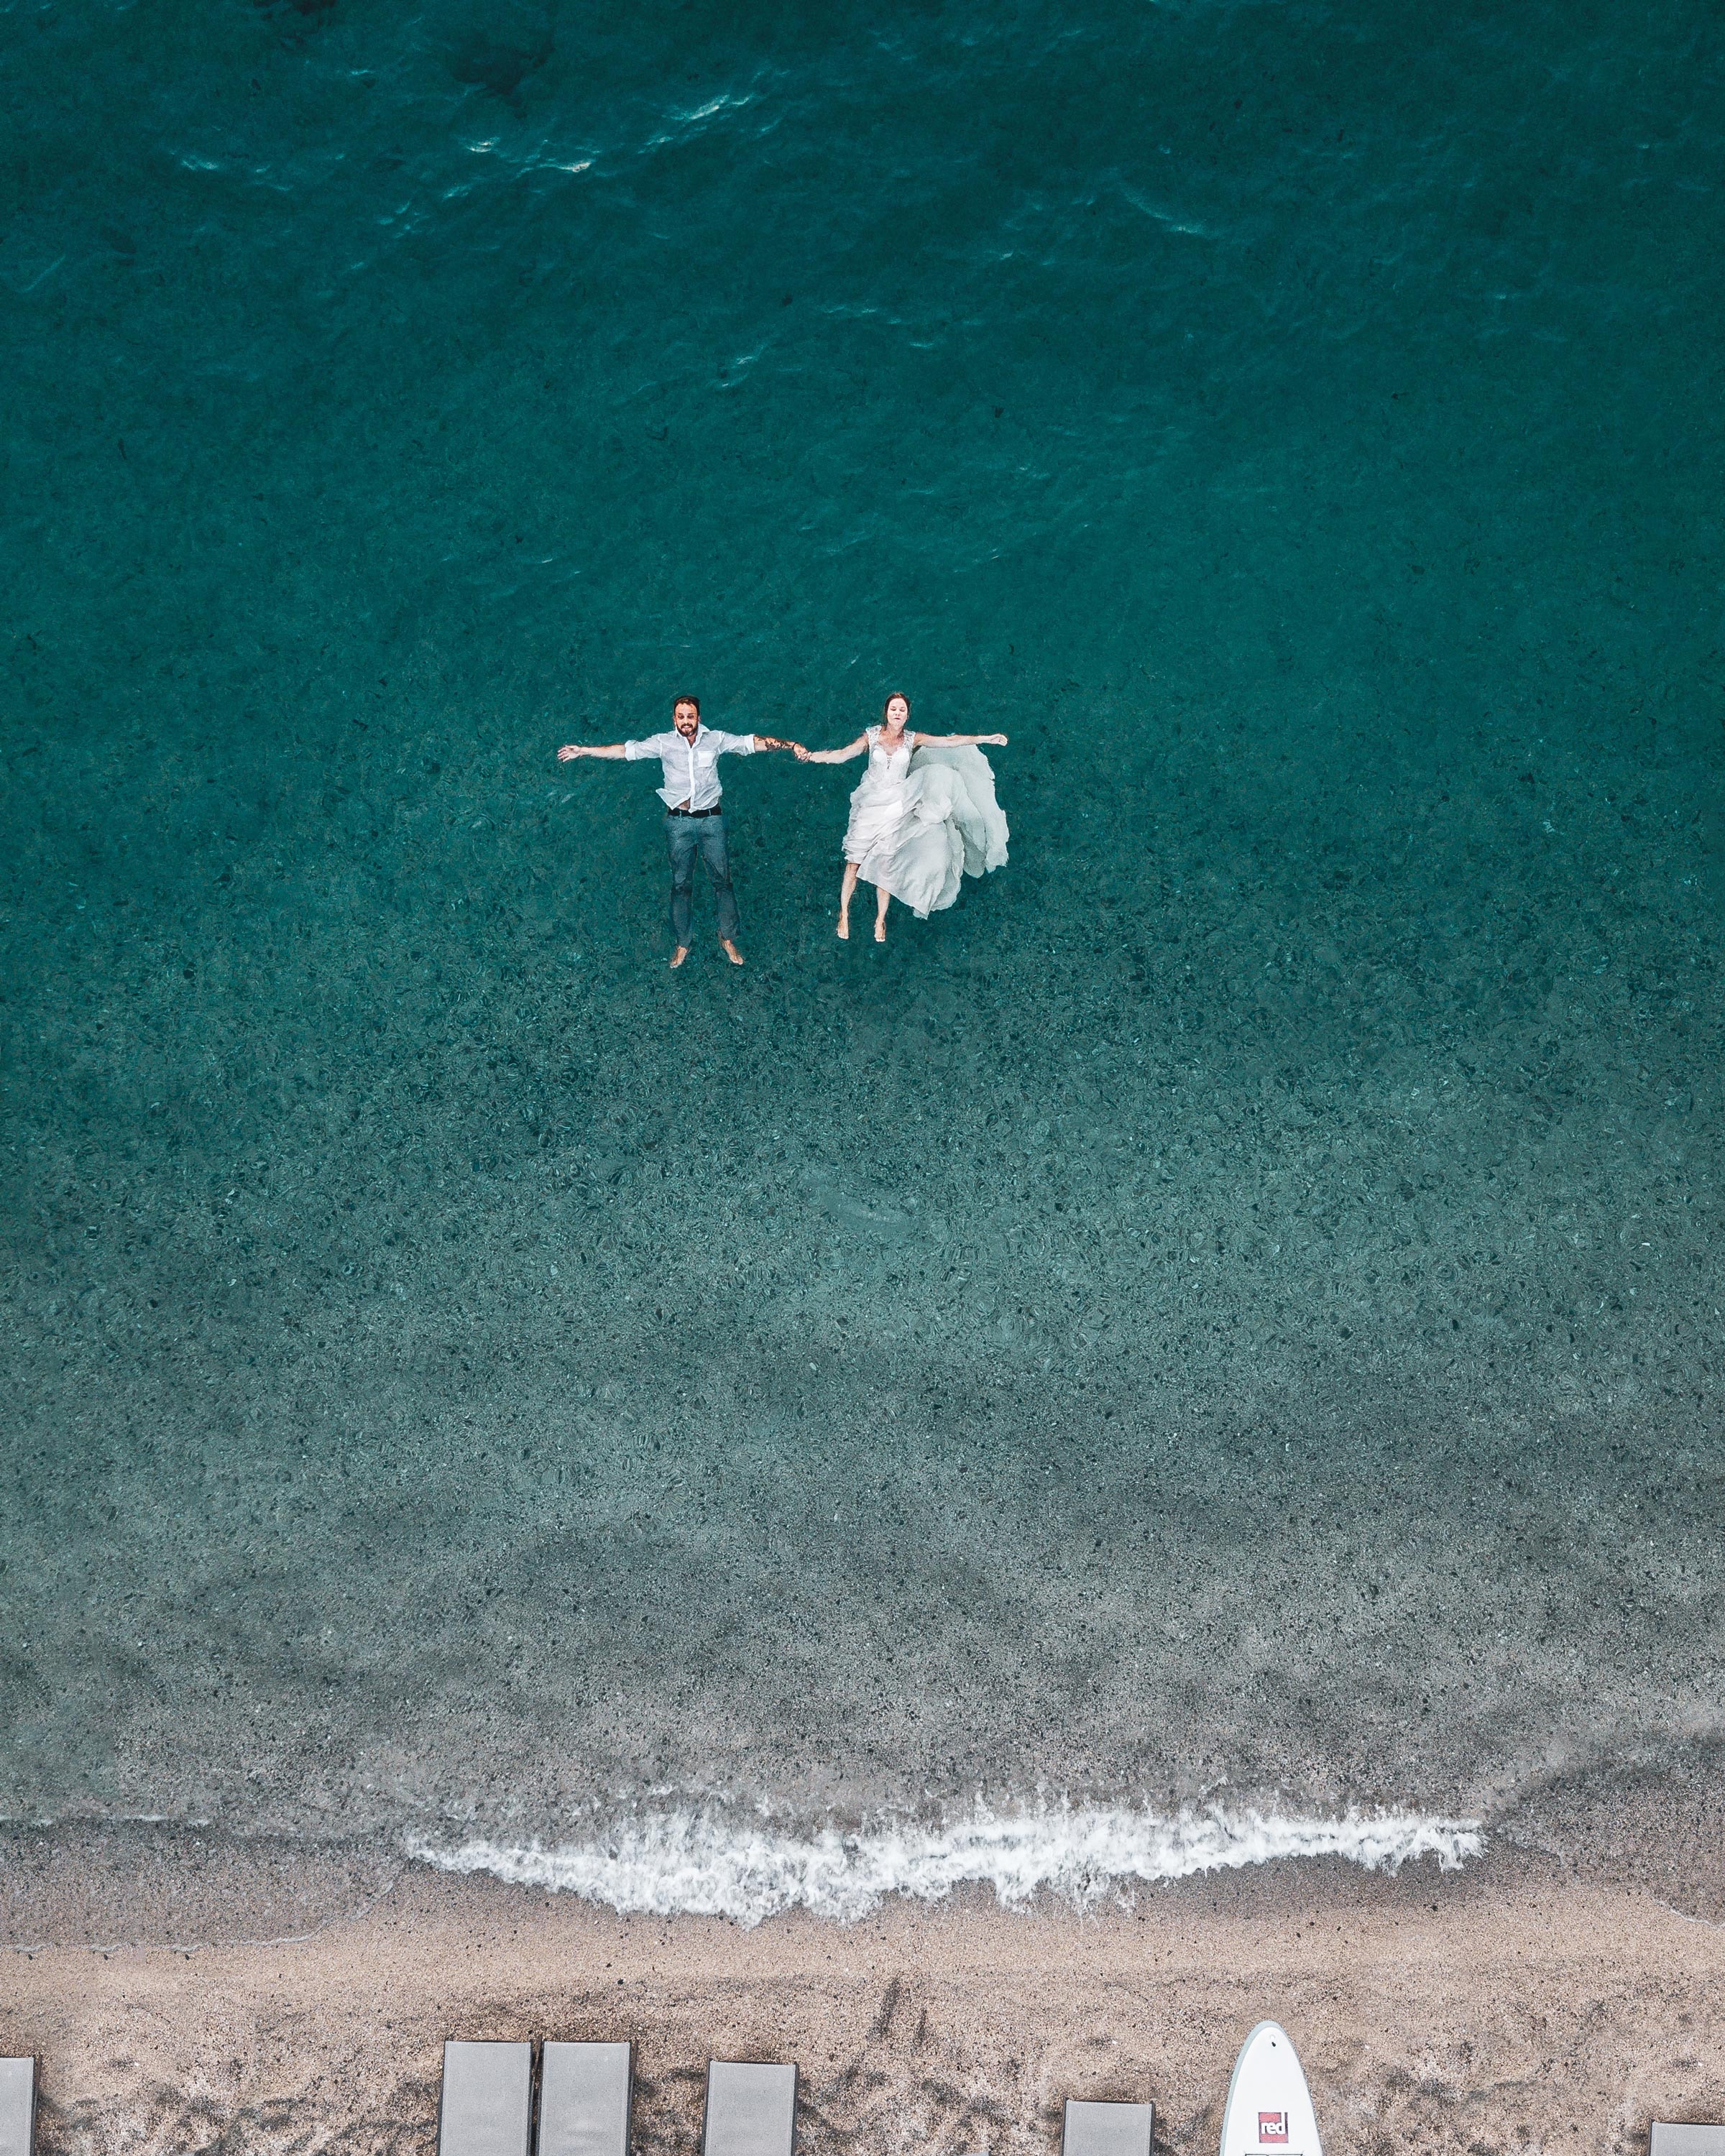 124308 download wallpaper couple, water, love, view from above, pair, romance screensavers and pictures for free